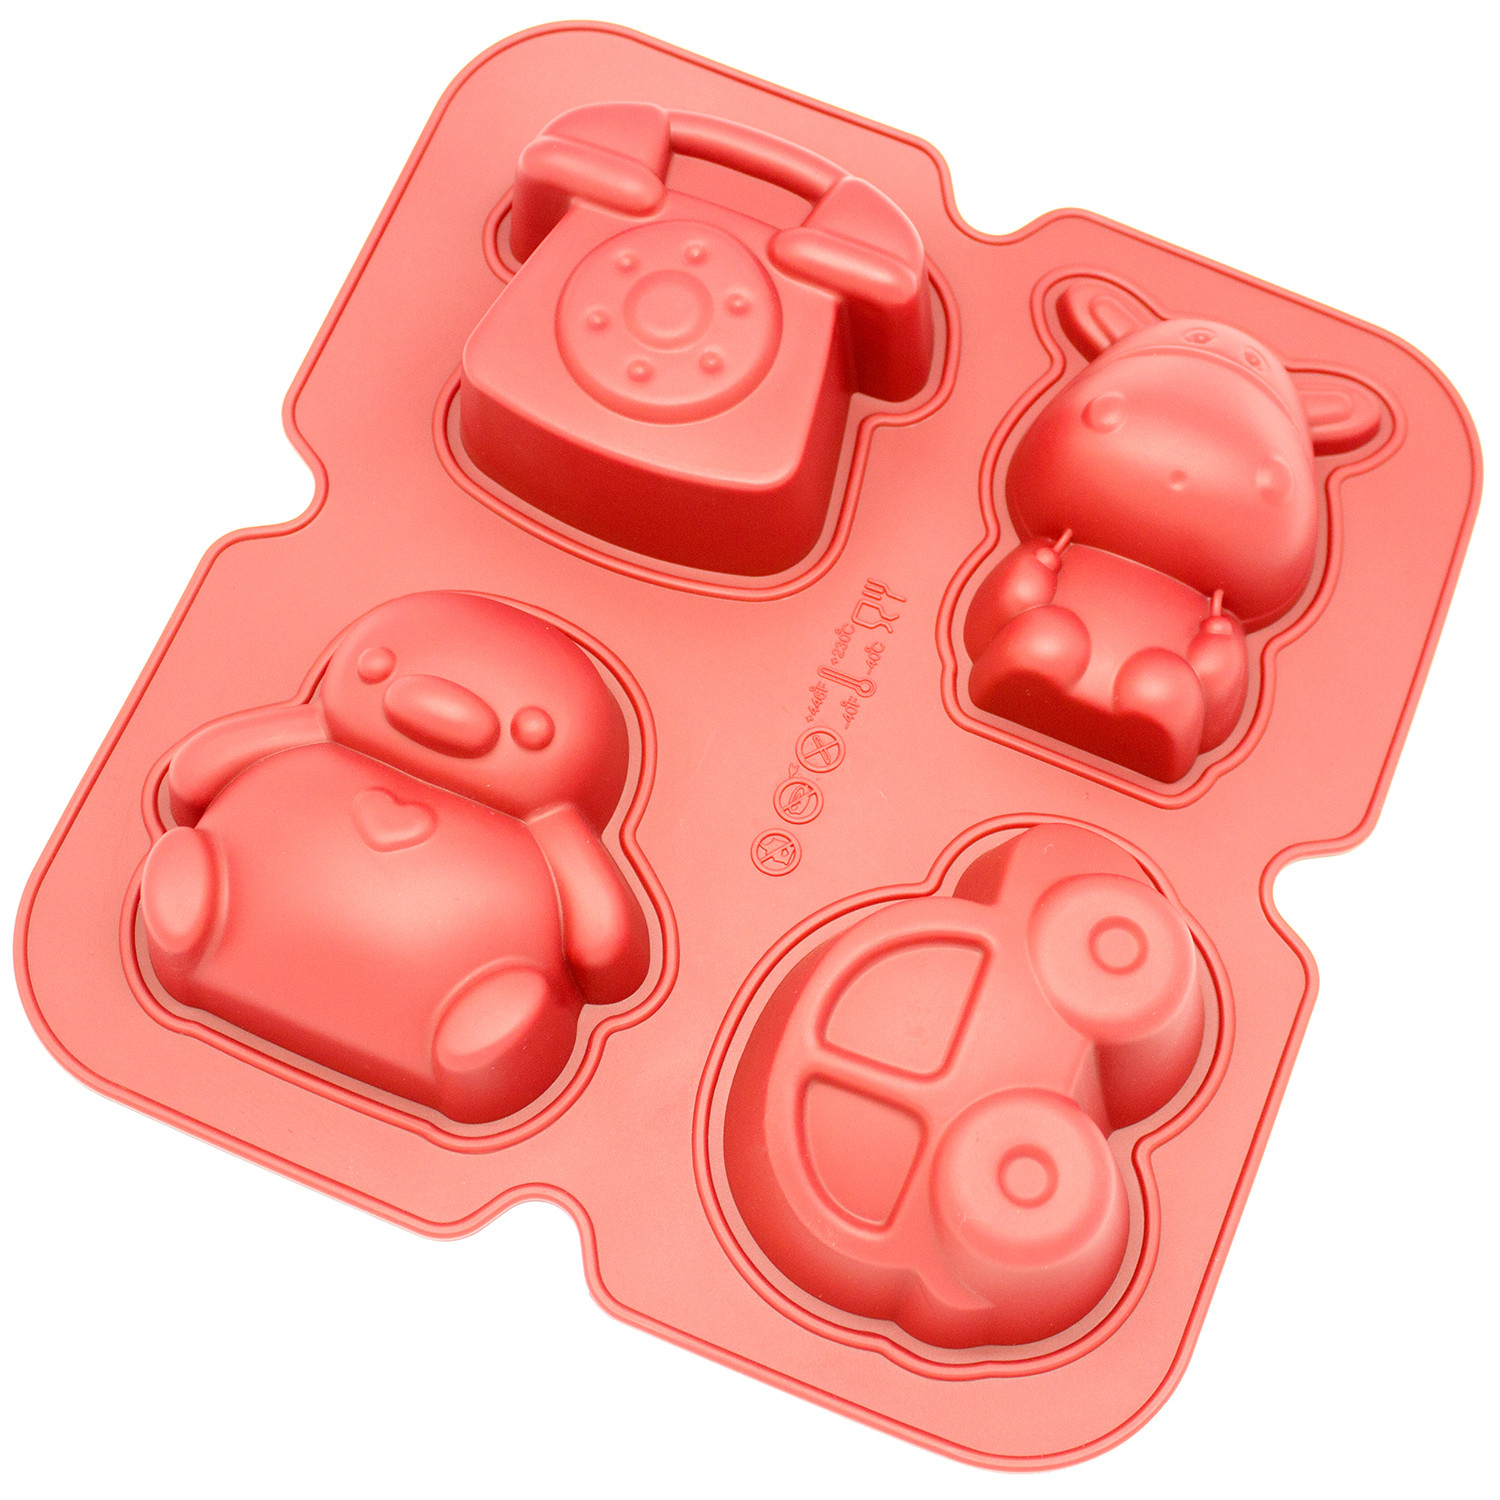 Freshware Silicone Mold, Soap Mold for Pudding, Muffin, Cupcake, Cheesecake and Soap, Penguin, Hippo, Toy and Phone, 4-Cavity